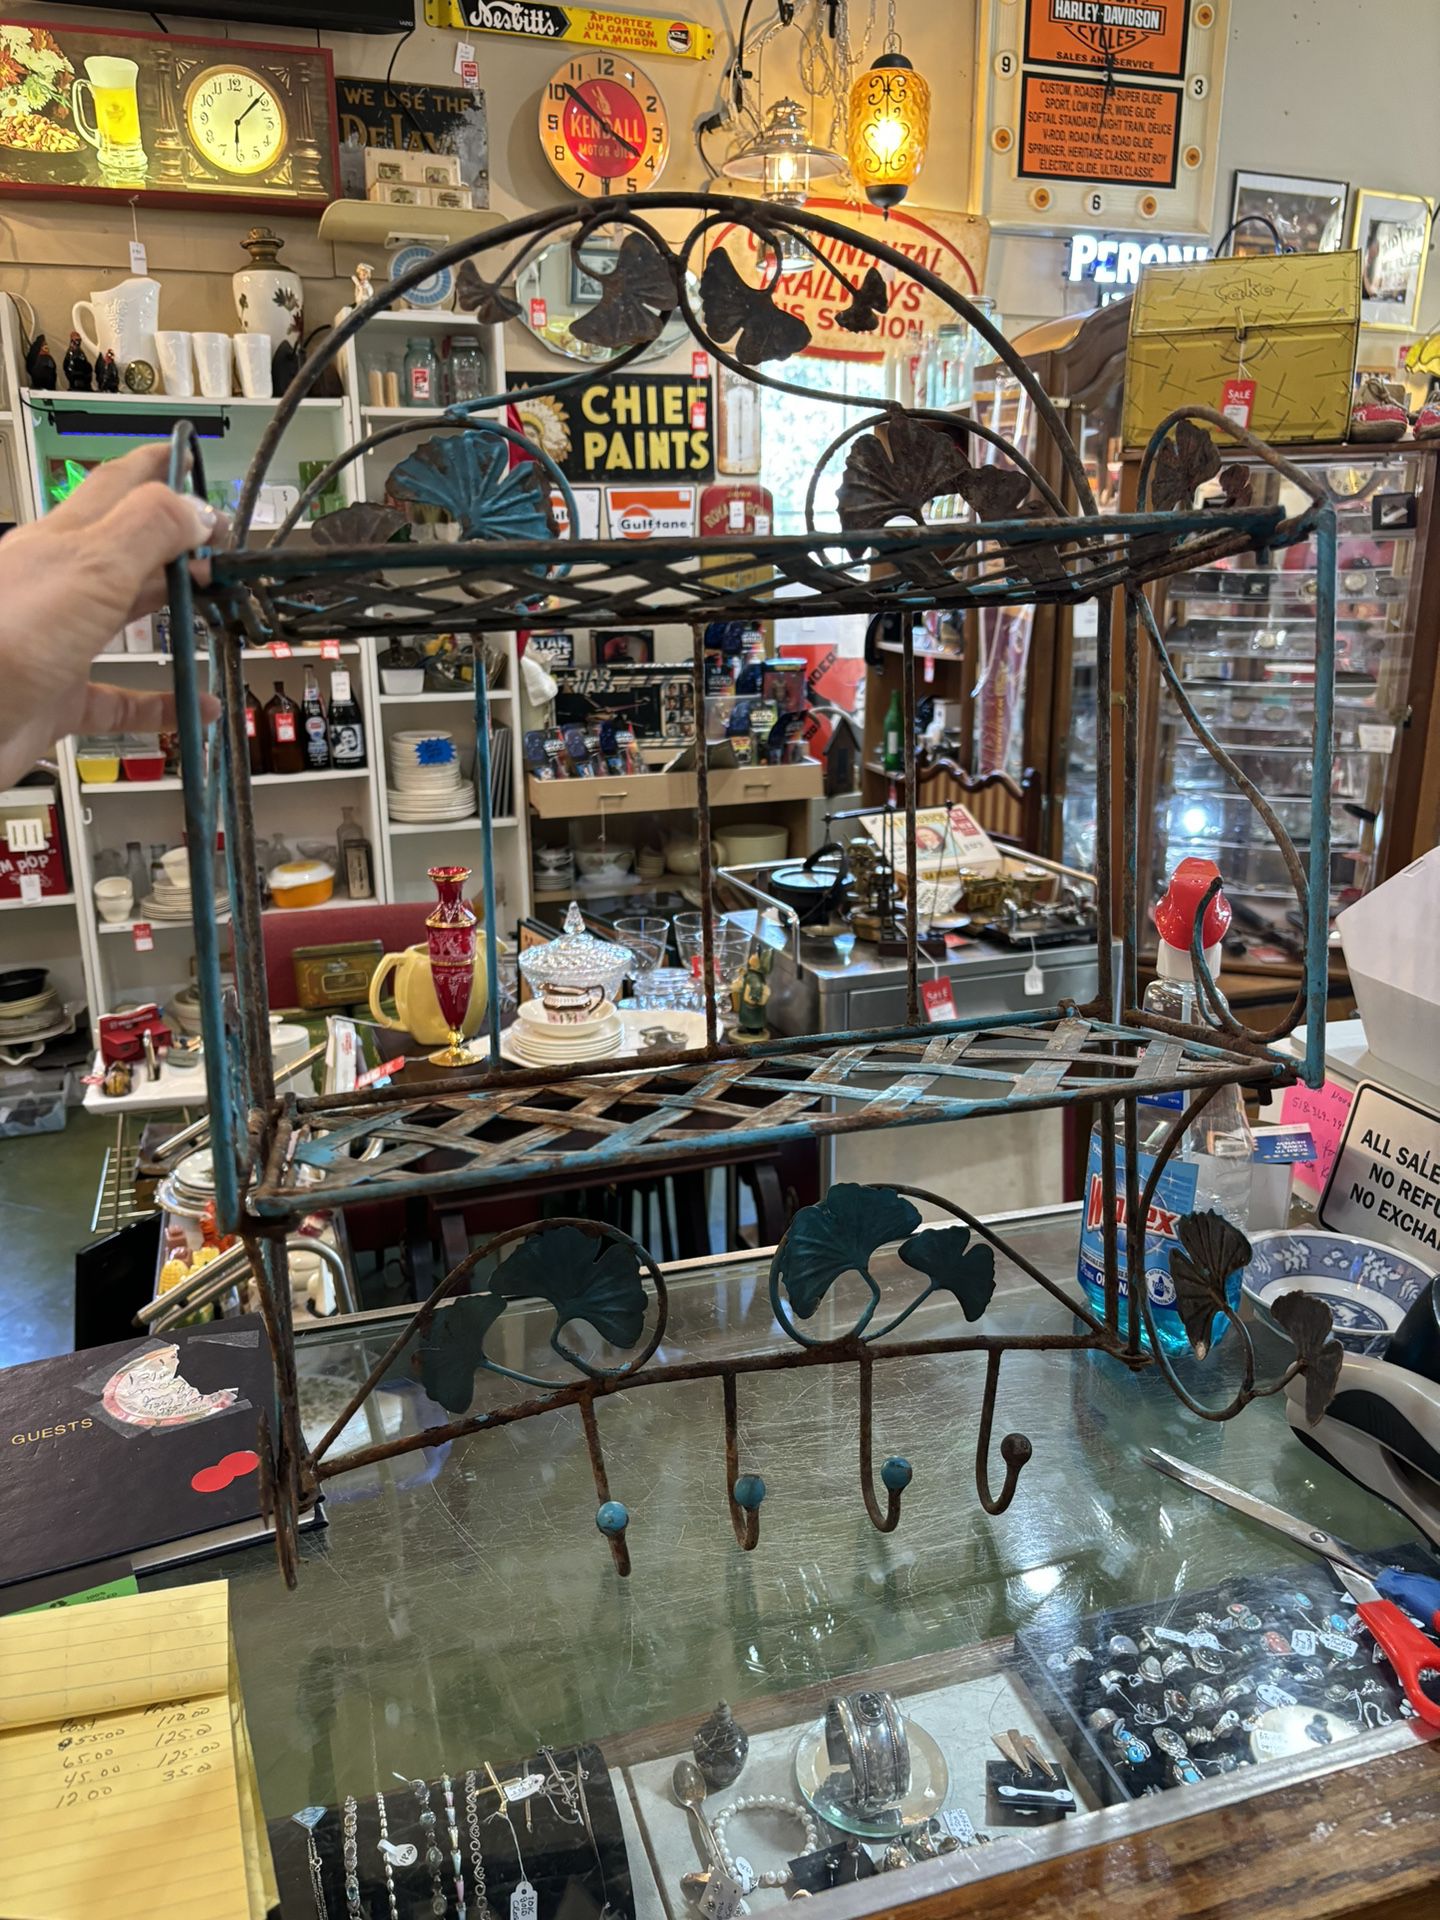 16x7x23 vintage metal shelves and hooks. Great for indoors or outdoor garden.  35.00.  Johanna at Antiques and More. Located at 316b Main Street Buda.